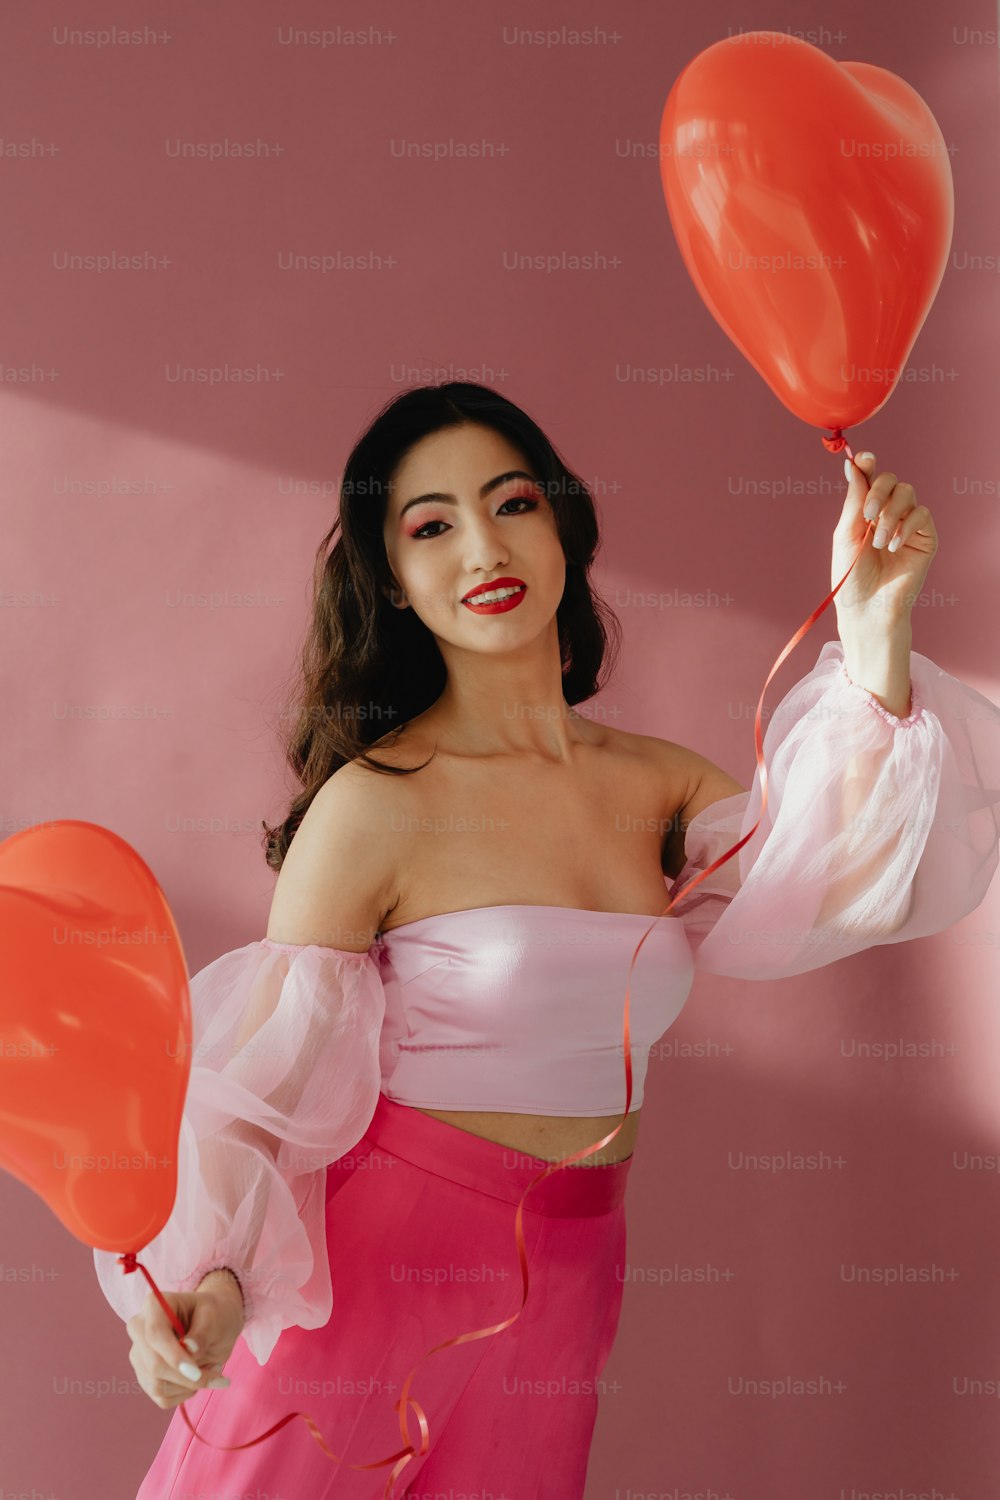 a woman in a pink dress holding two red balloons